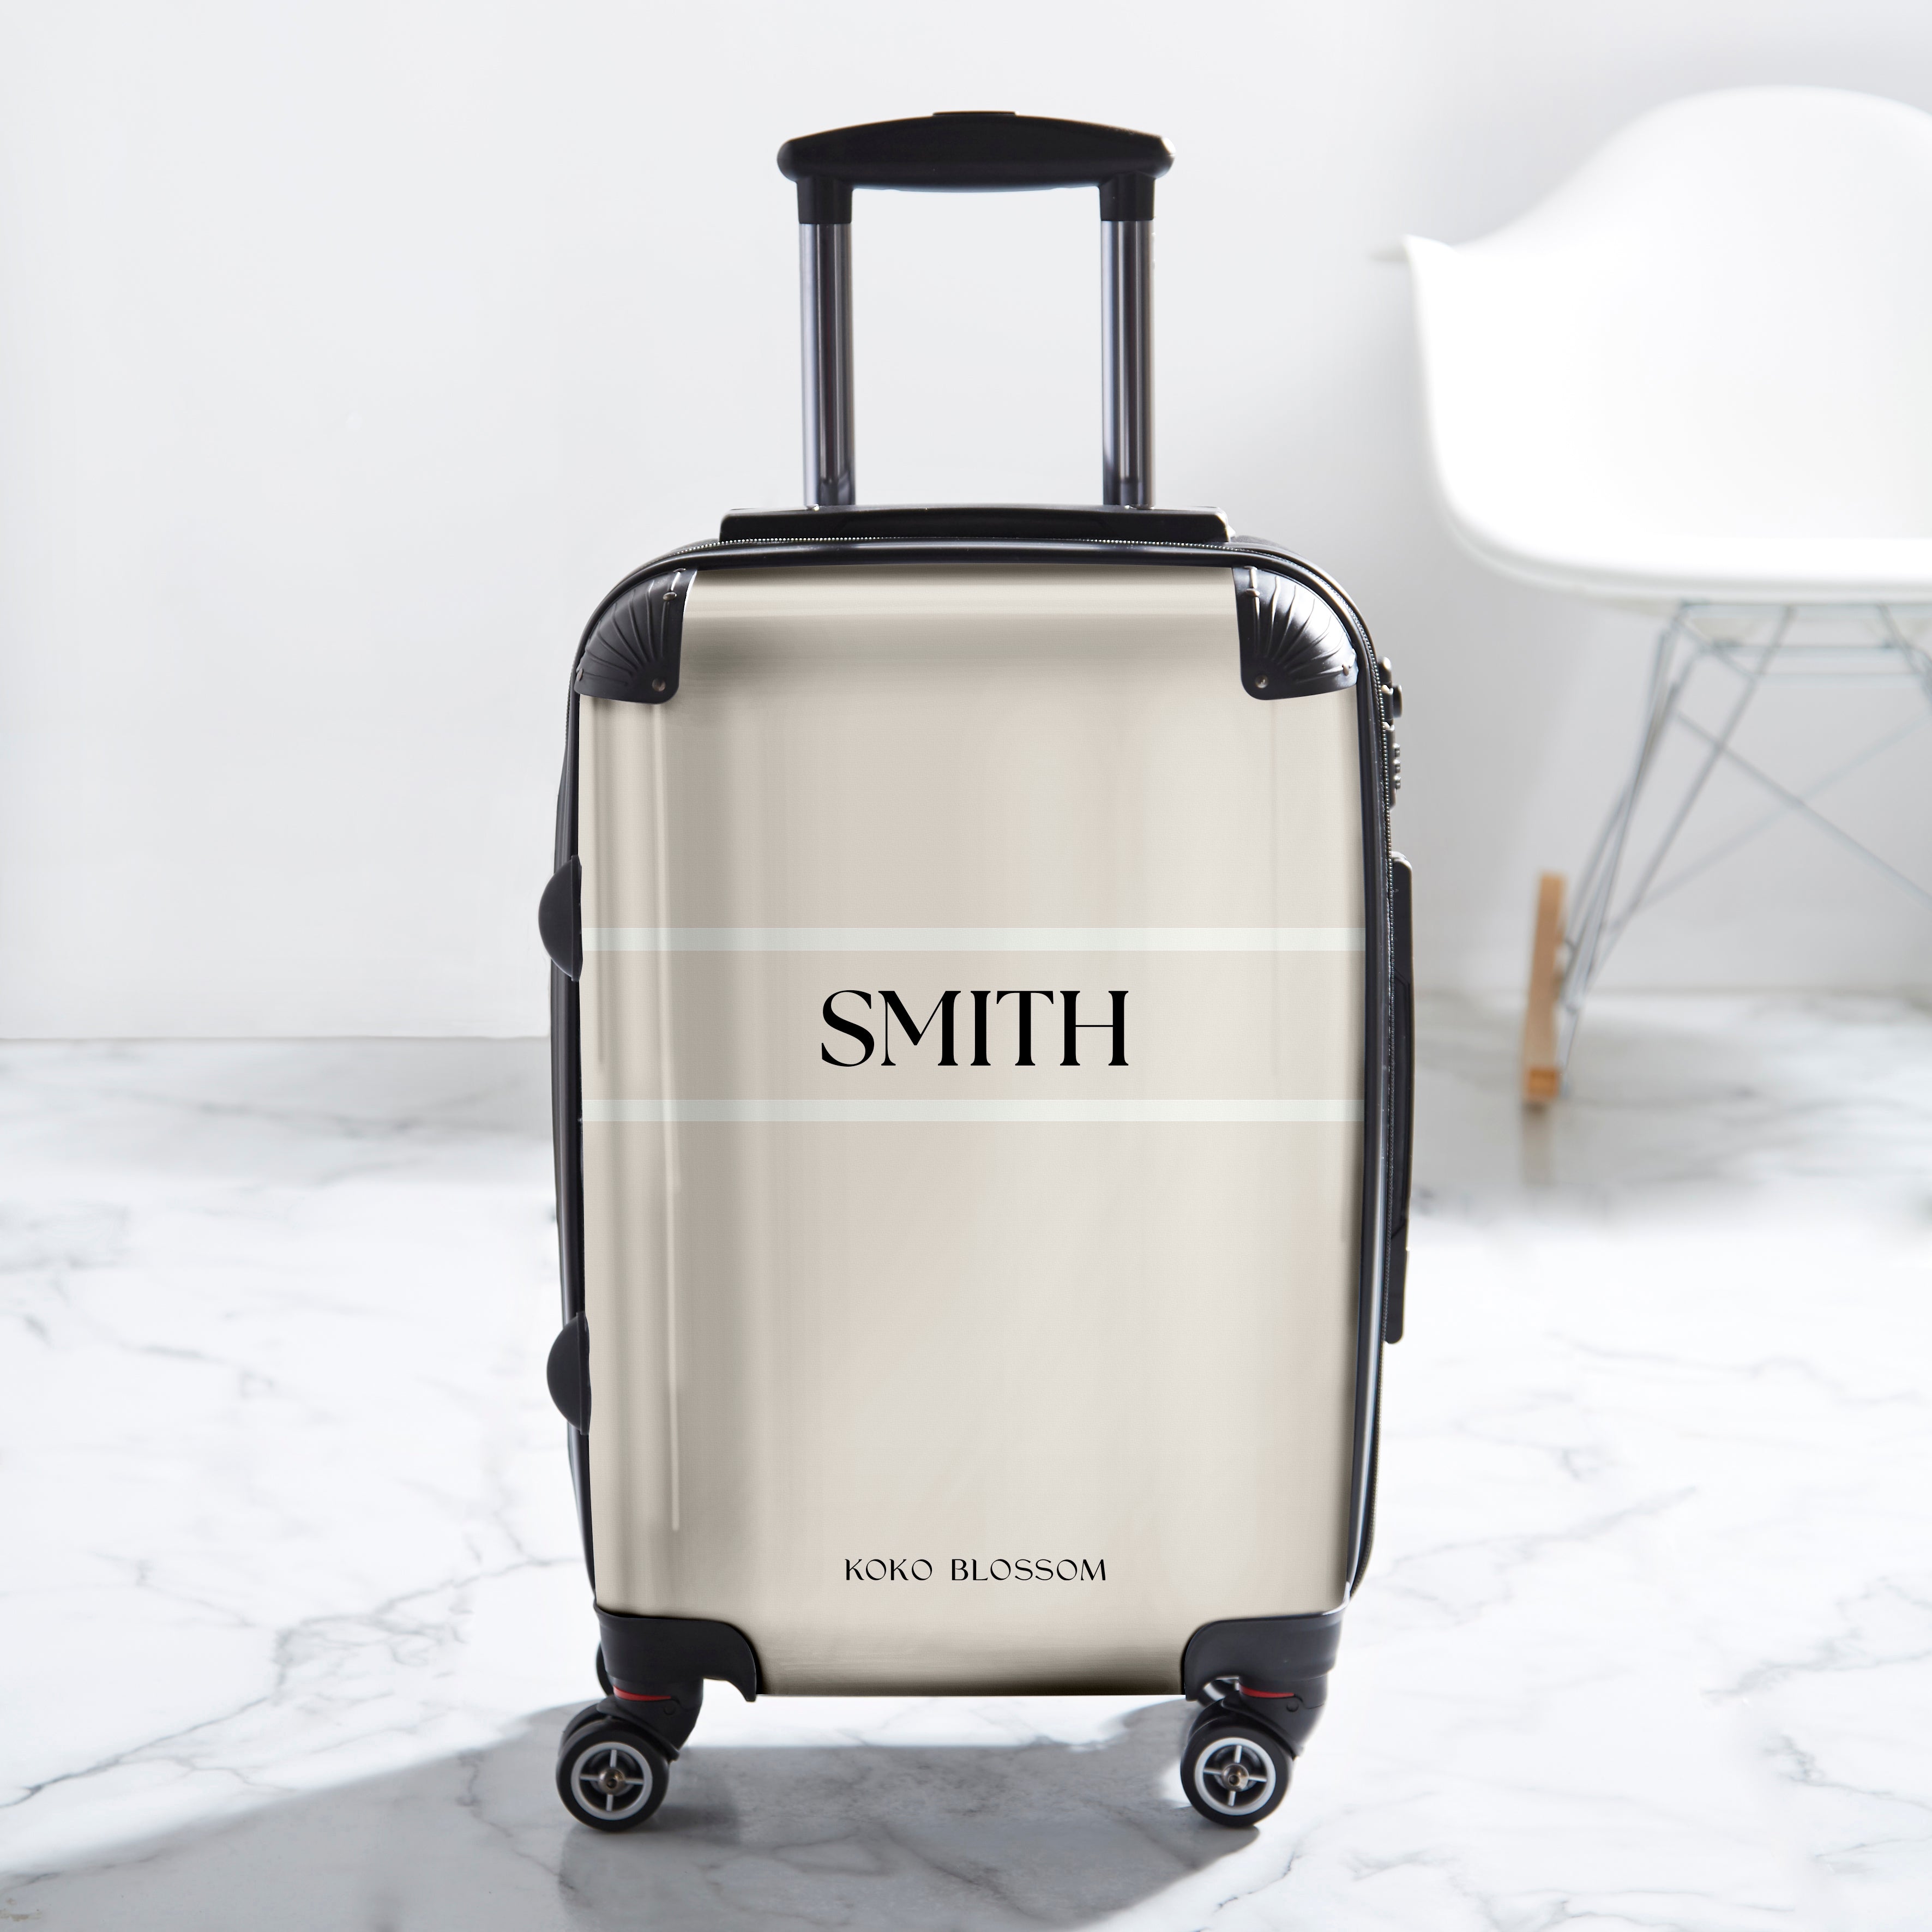 Image of Personalised Suitcase | Tan Lines in Vanilla  SMITH e e e Eziii,%nzmwp z:%;mai%@?i% S WAl y 